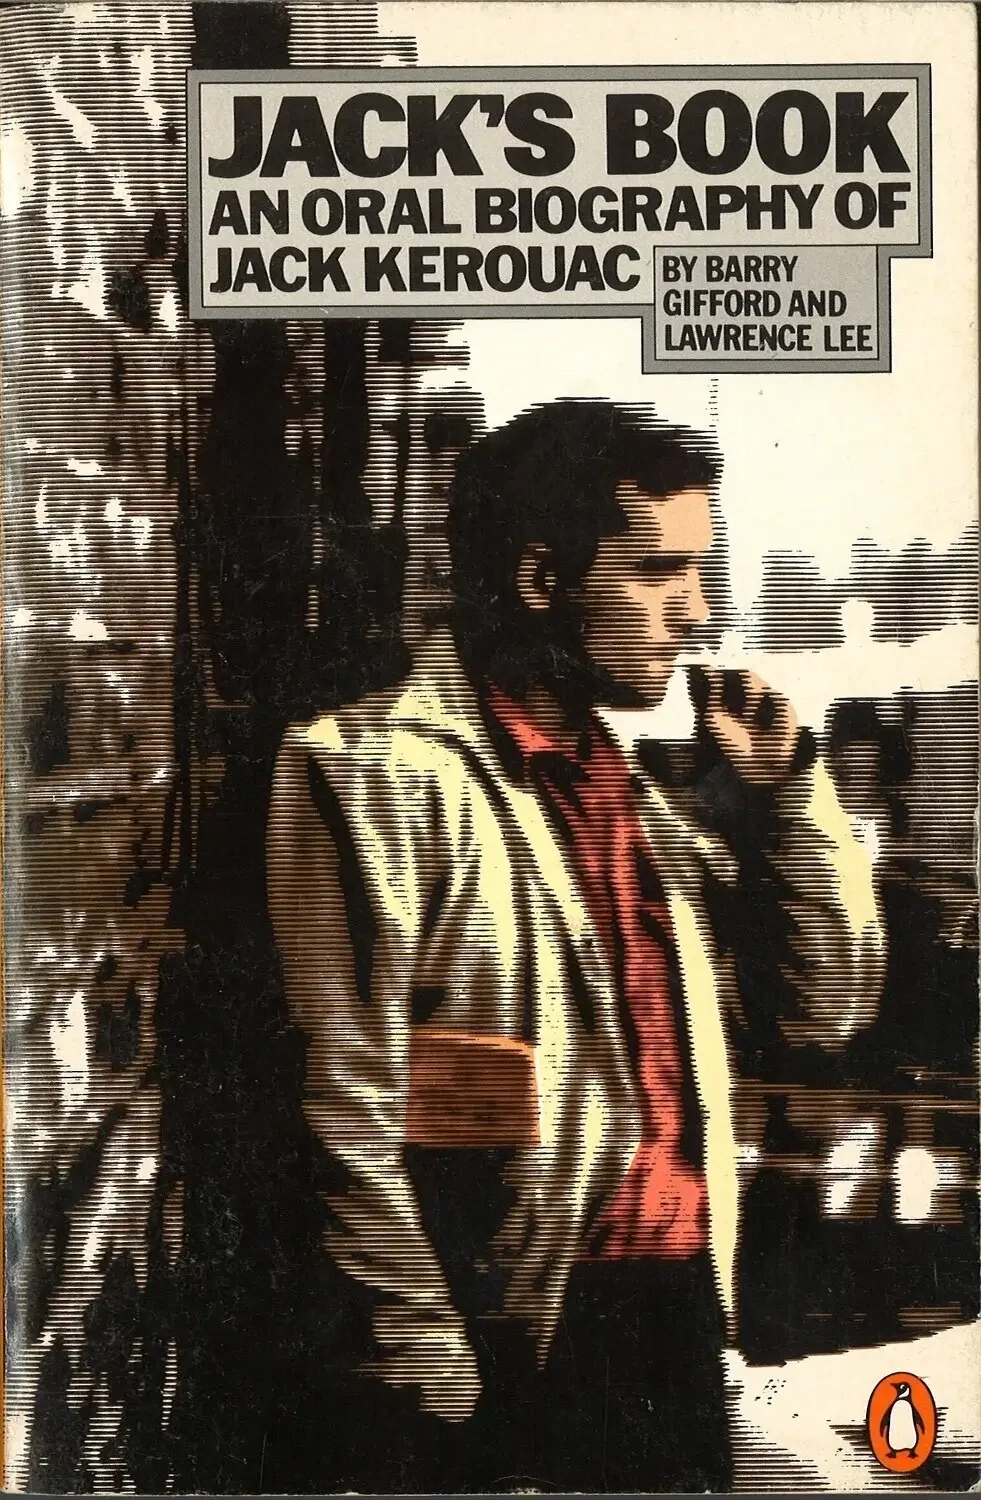 Jack's Book by Barry Gifford, Lawrence Lee